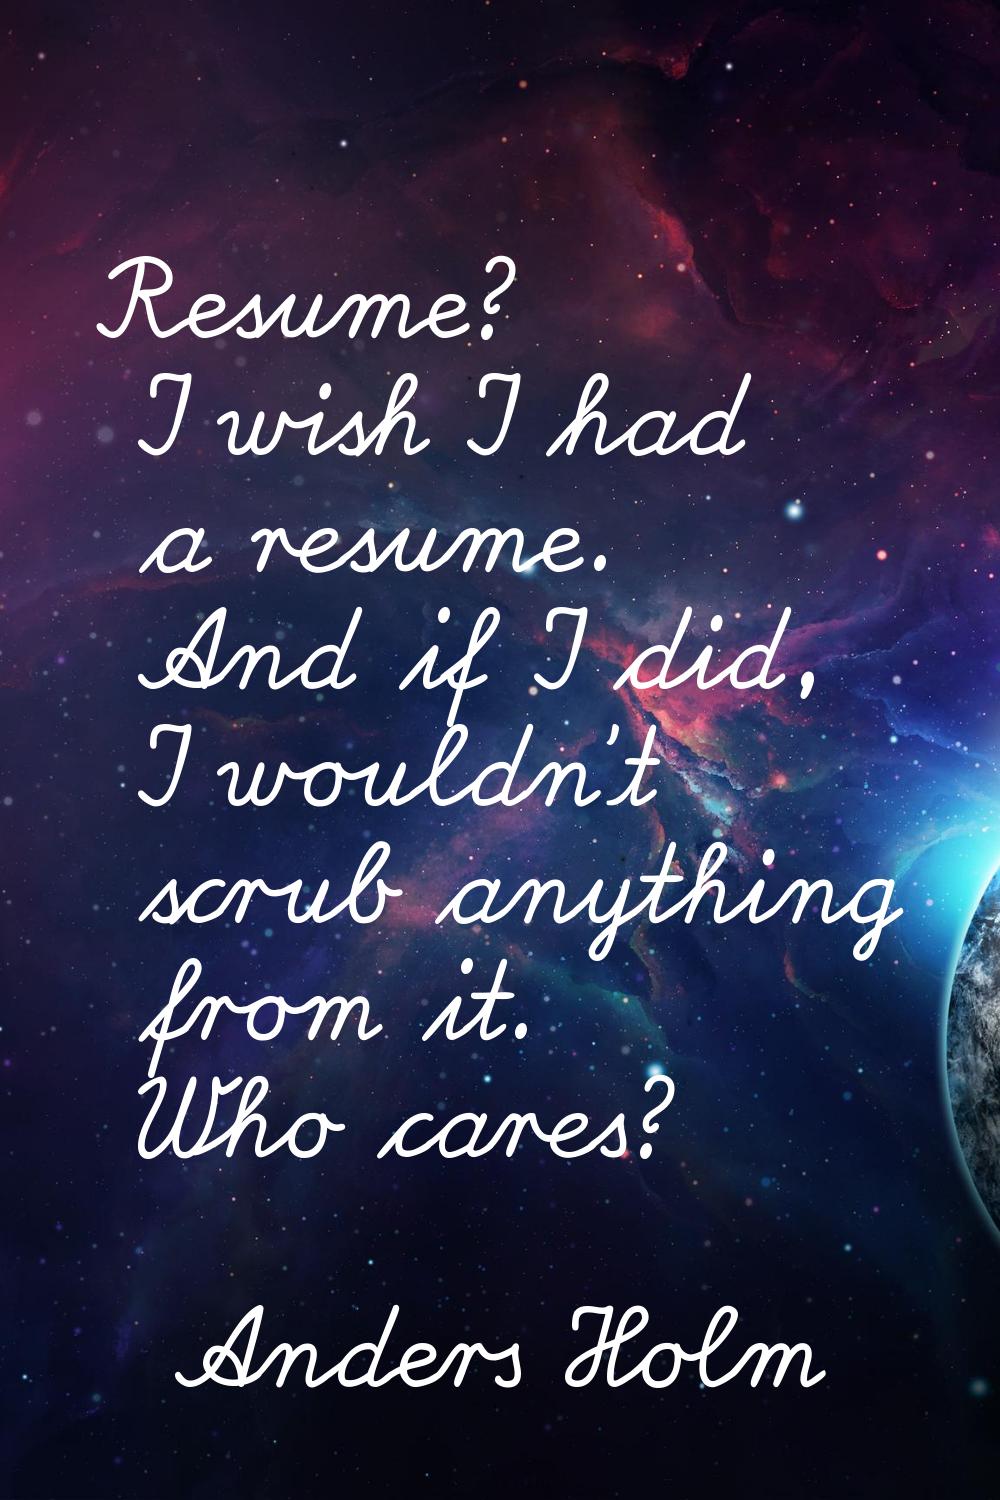 Resume? I wish I had a resume. And if I did, I wouldn't scrub anything from it. Who cares?